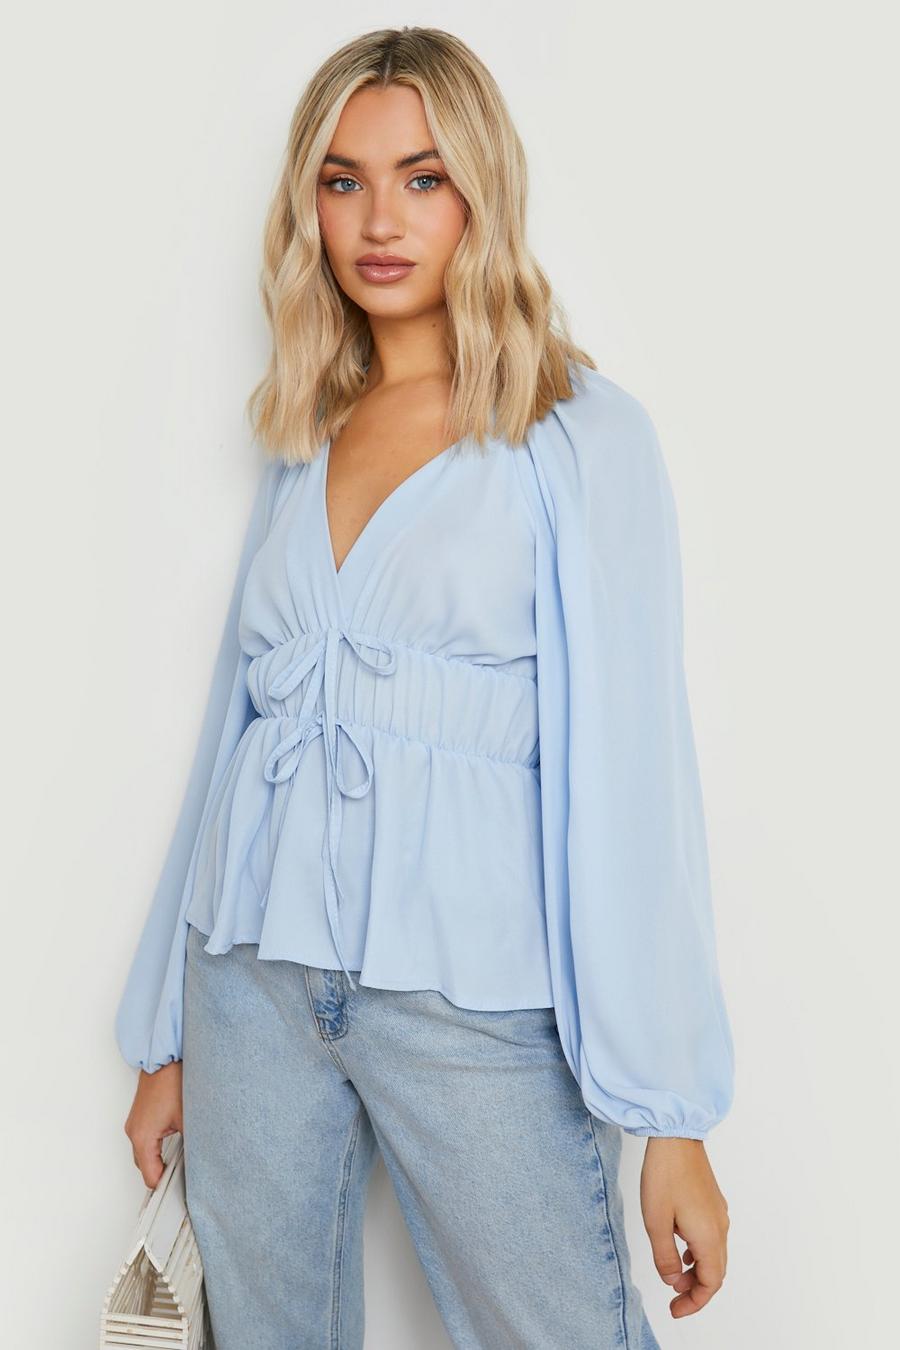 Baby blue Chiffon Tie Teired Blouse